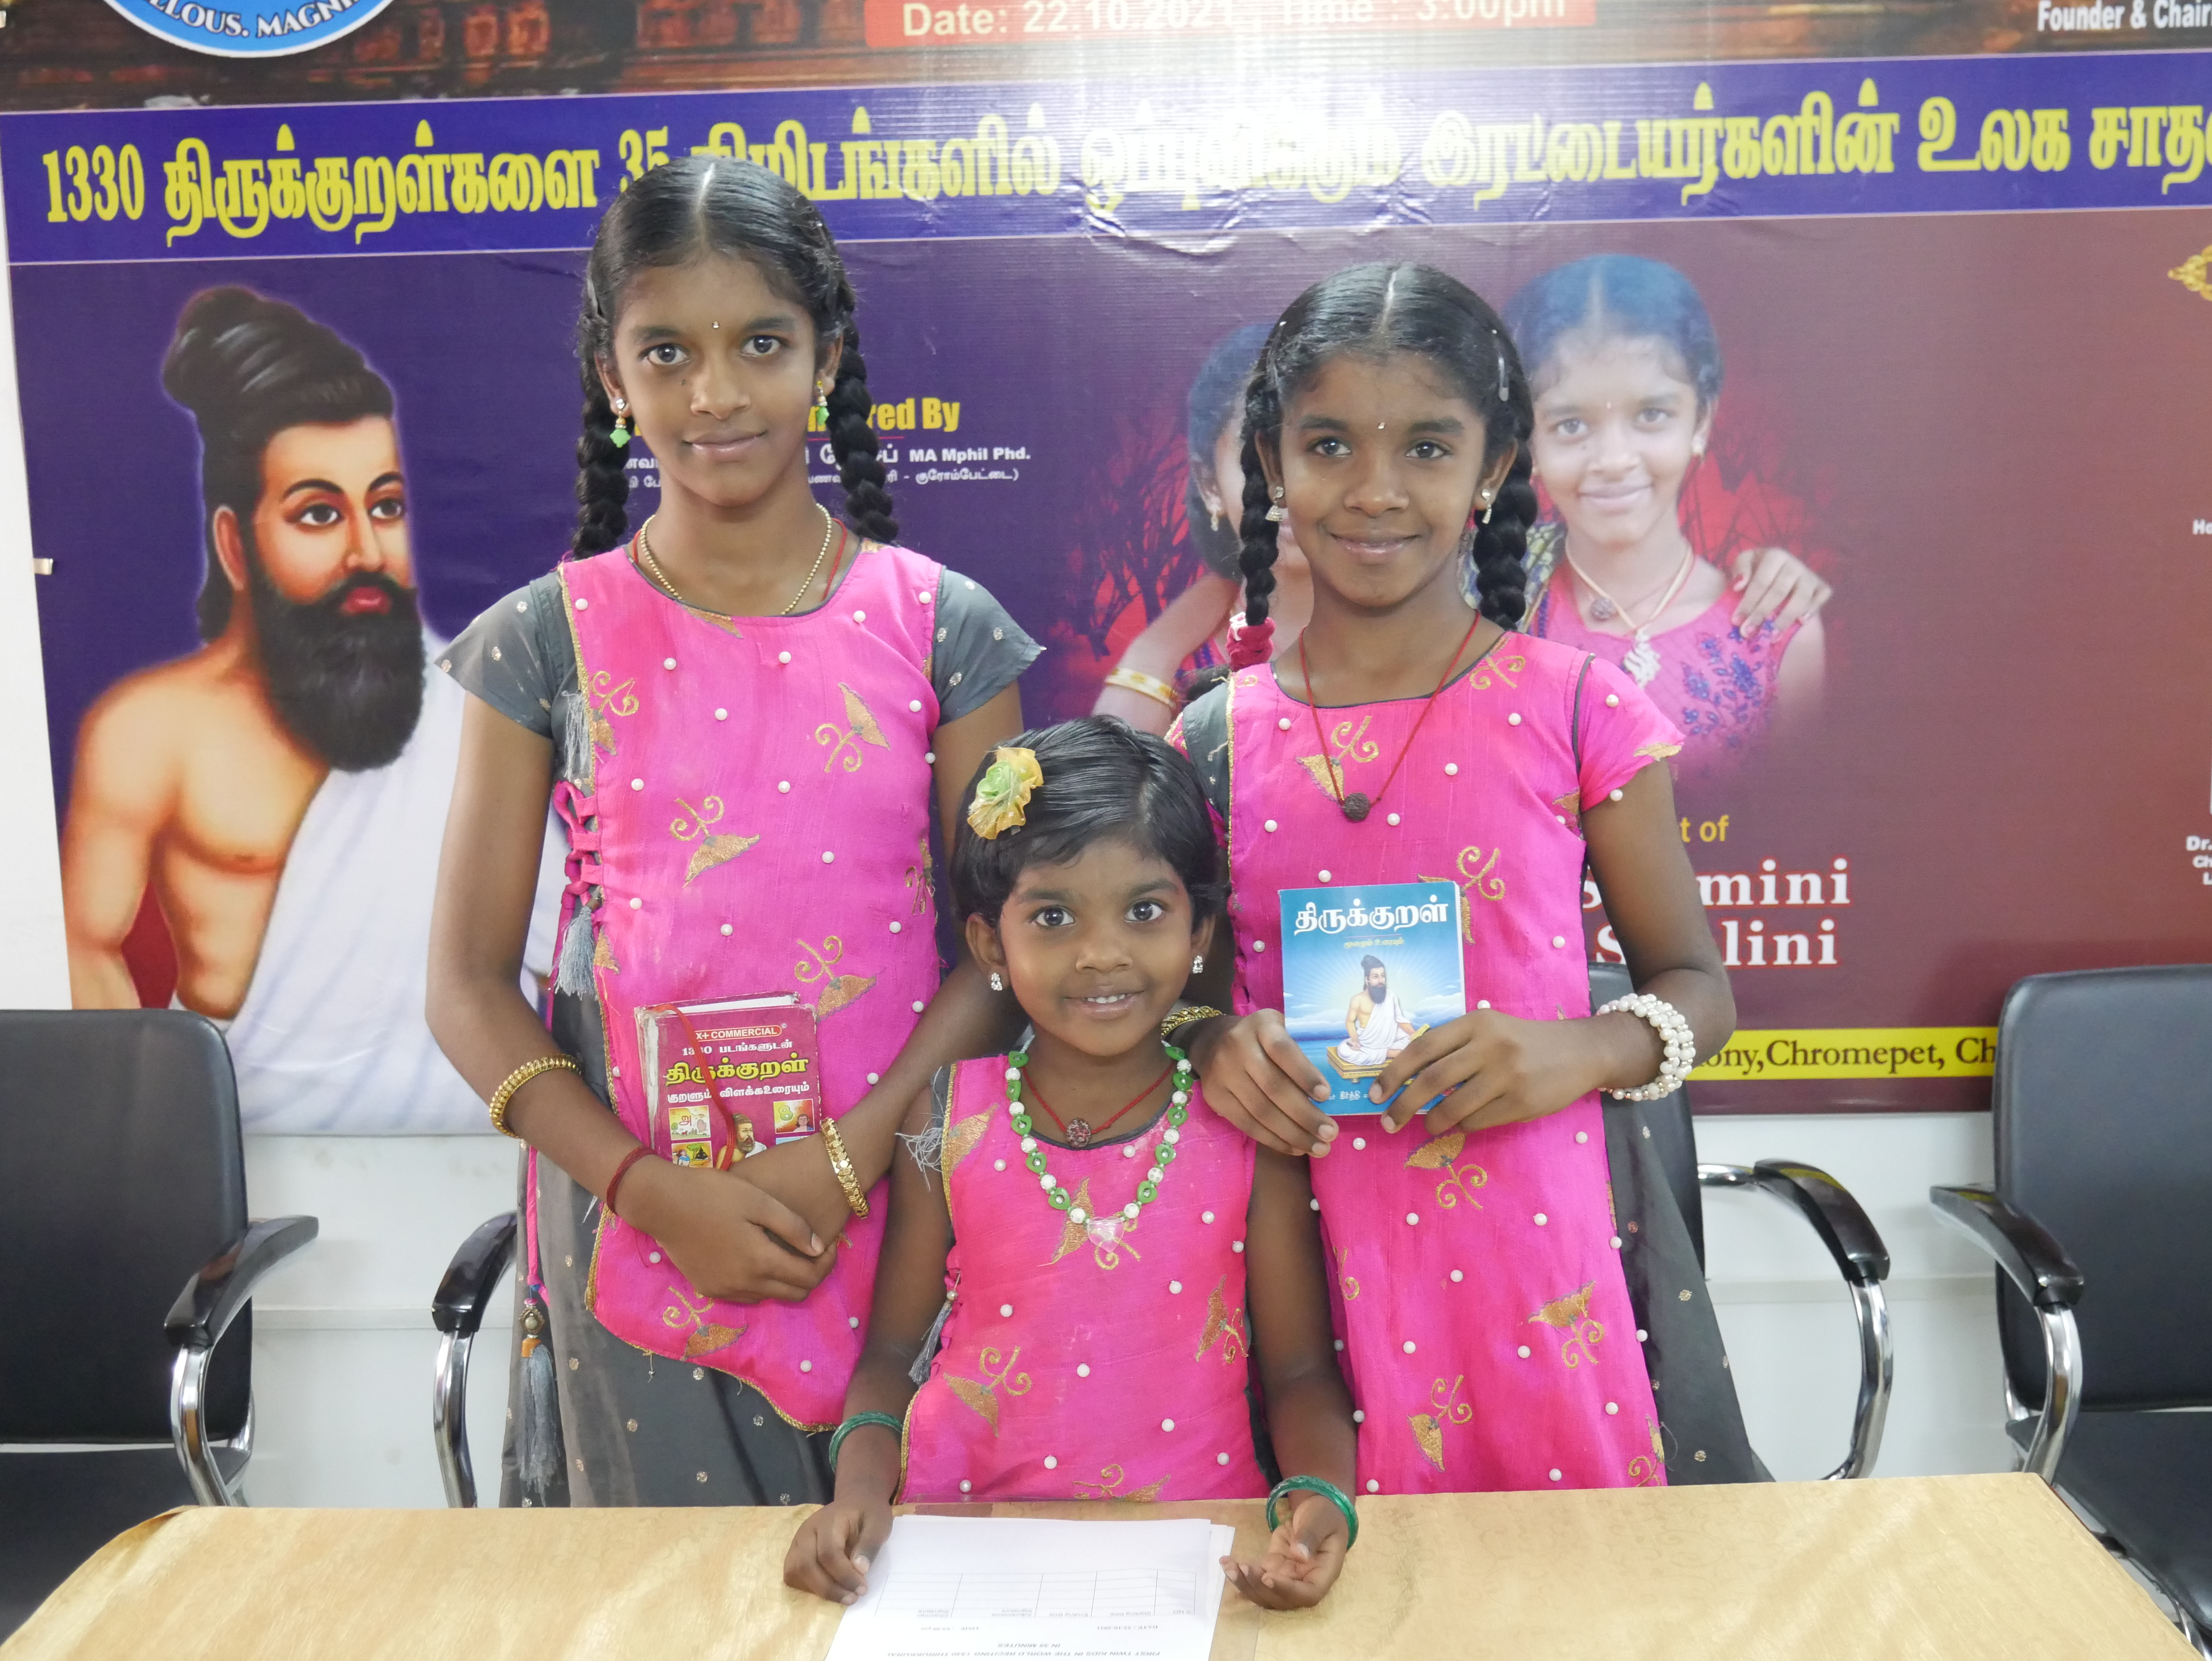 FIRST TWIN KIDS IN THE WORLD RECITING 1330 THIRUKKURAL IN 35 MINUTES